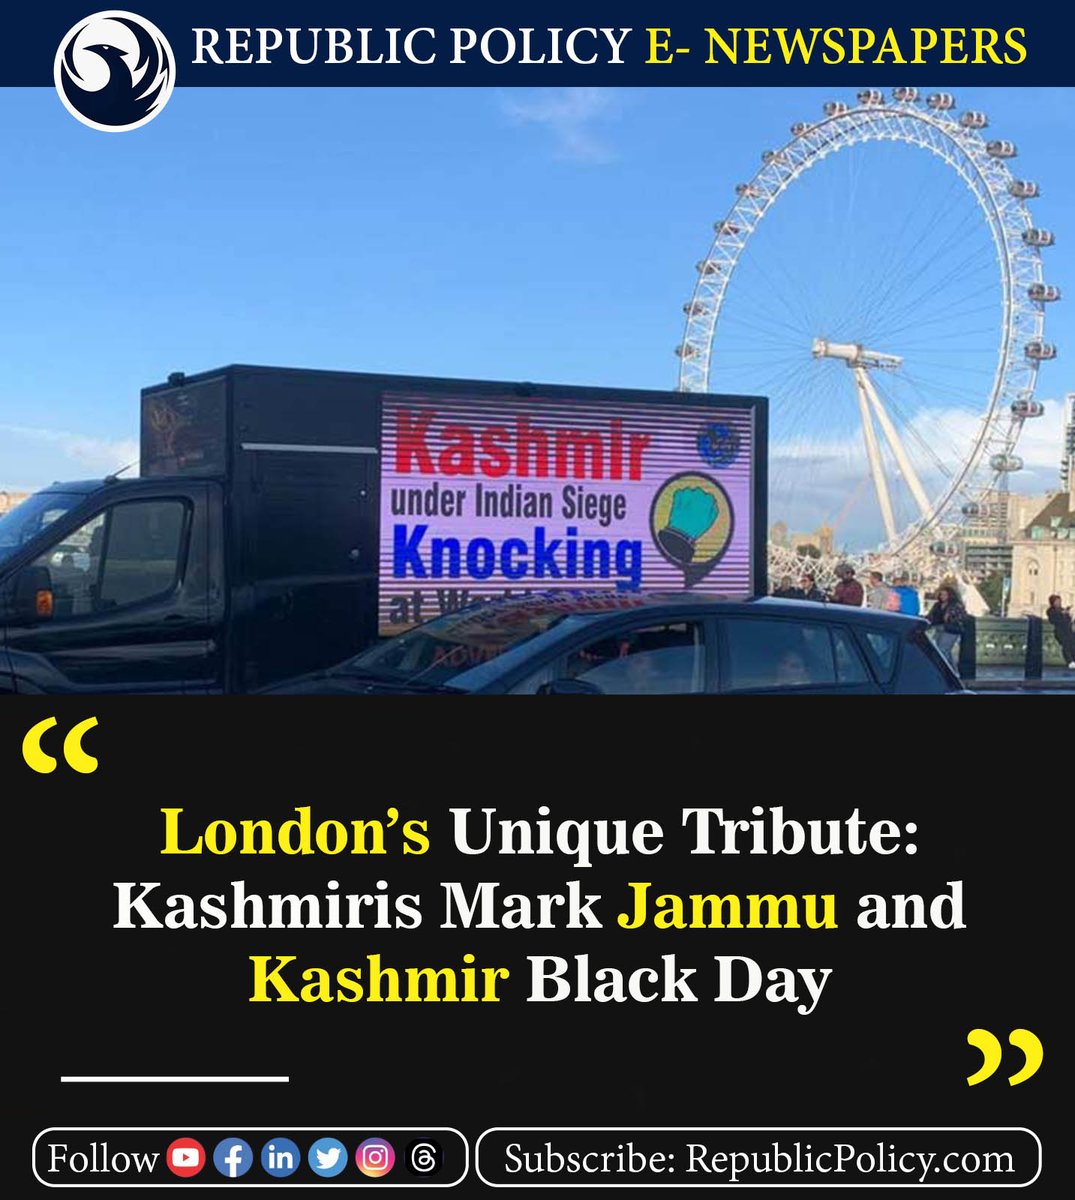 Kashmiris in London marked Jammu and Kashmir Black Day in a distinctive manner, commemorating a significant historical event.

Read more: republicpolicy.com/londons-unique…

#KashmiriCommunity #LondonEvent #KashmirisInLondon #KashmirBlackDay #News